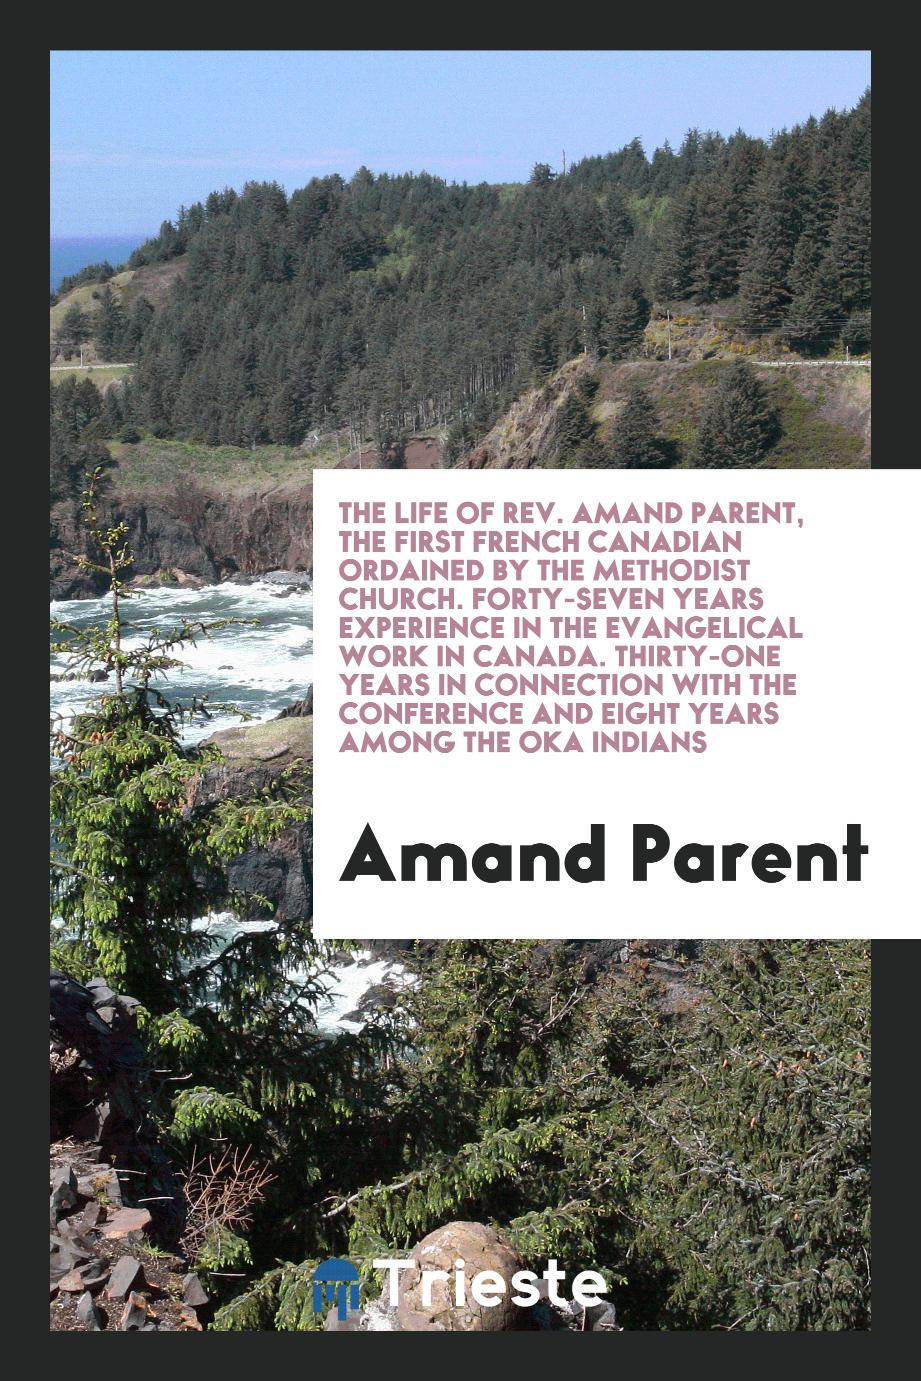 The life of Rev. Amand Parent, the first French Canadian ordained by the Methodist Church. Forty-seven years experience in the evangelical work in Canada. Thirty-one years in connection with the conference and eight years among the Oka Indians